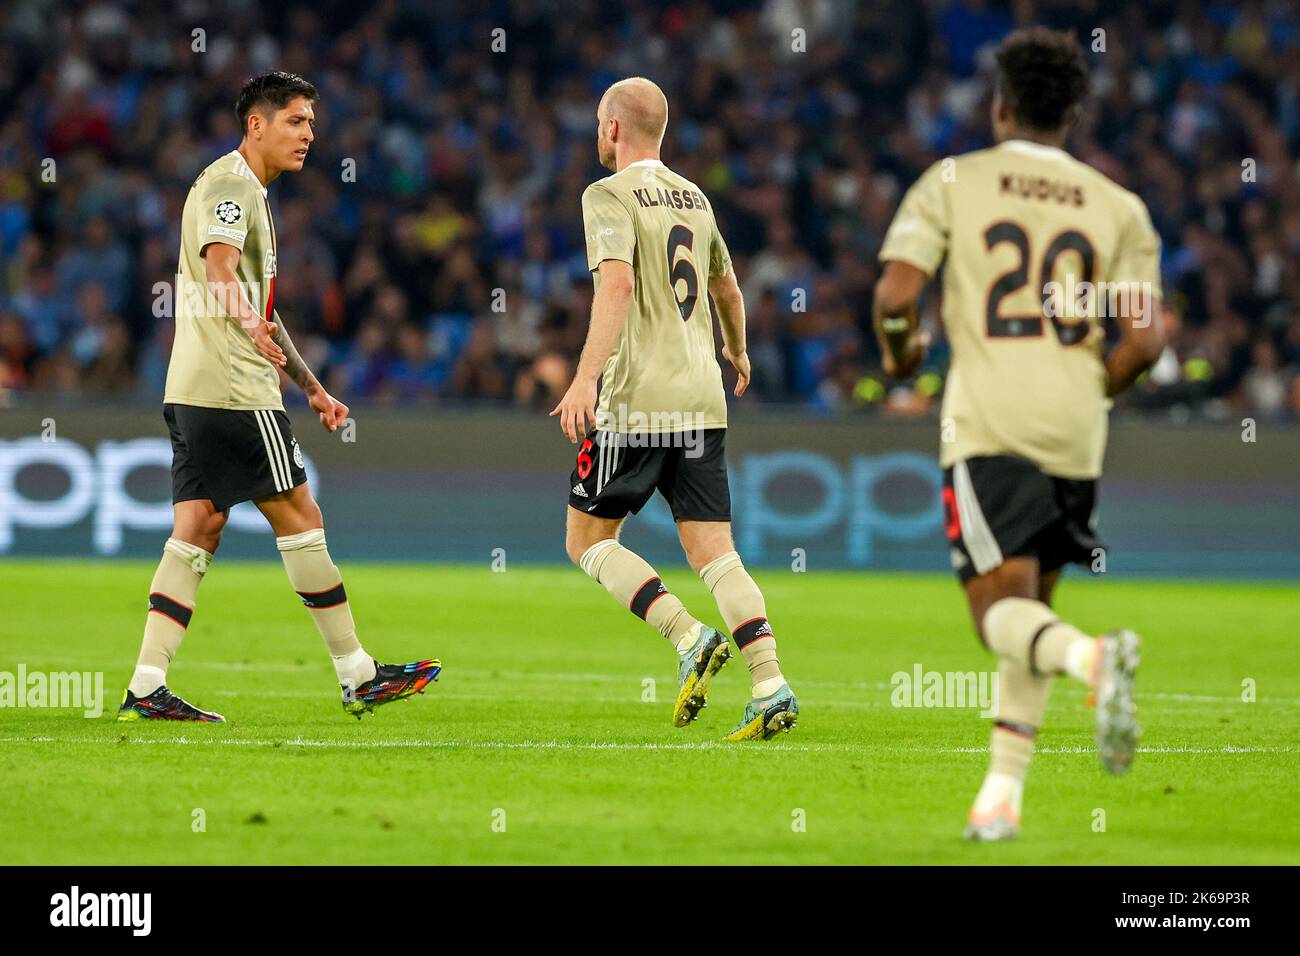 NAPELS, ITALY - OCTOBER 12: Davy Klaasen of Ajax (6) has scored the 2-1 and is congratulated by Edson Alvarez of Ajax. On the right Mohammed Kudus of Ajax during the Group A - UEFA Champions League match between Napoli and Ajax at the Stadio Diego Armando Maradona on October 12, 2022 in Napels, Italy (Photo by Ben Gal/Orange Pictures) Credit: Orange Pics BV/Alamy Live News Stock Photo